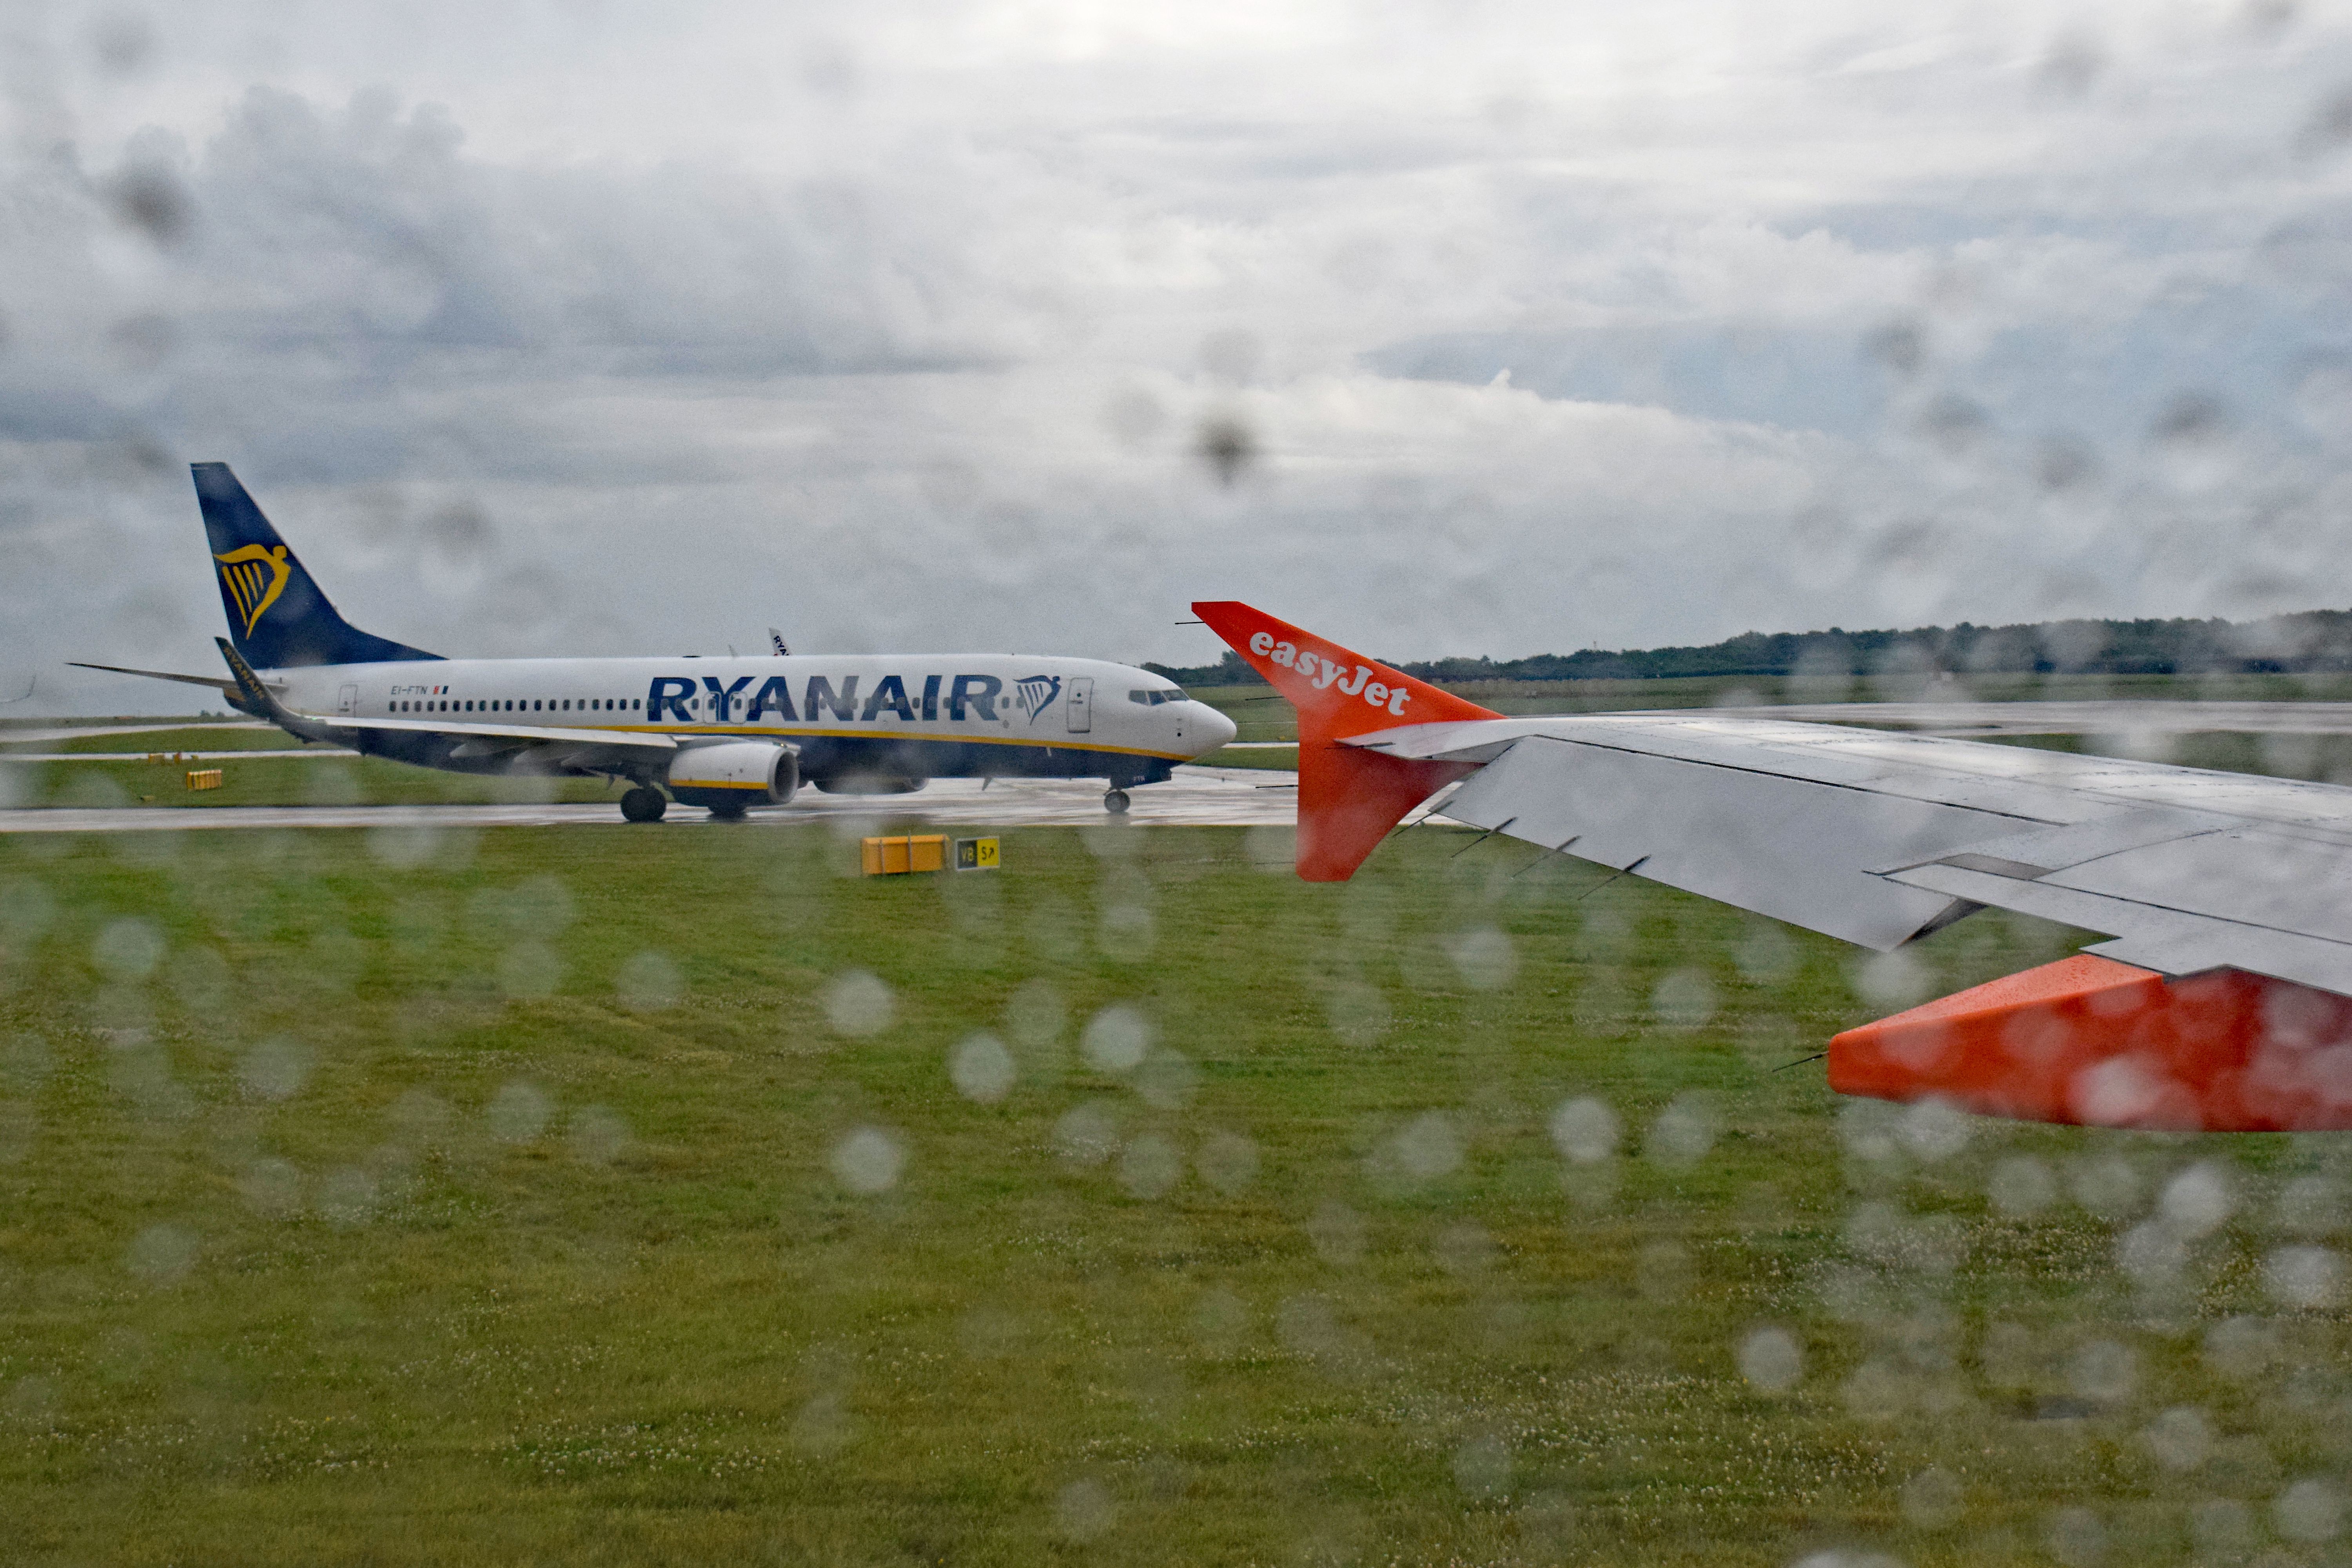 A Ryanair Boeing 737-800 visible from an easyJet Airbus aircraft at rainy Manchester Airport MAN shutterstock_1461029894